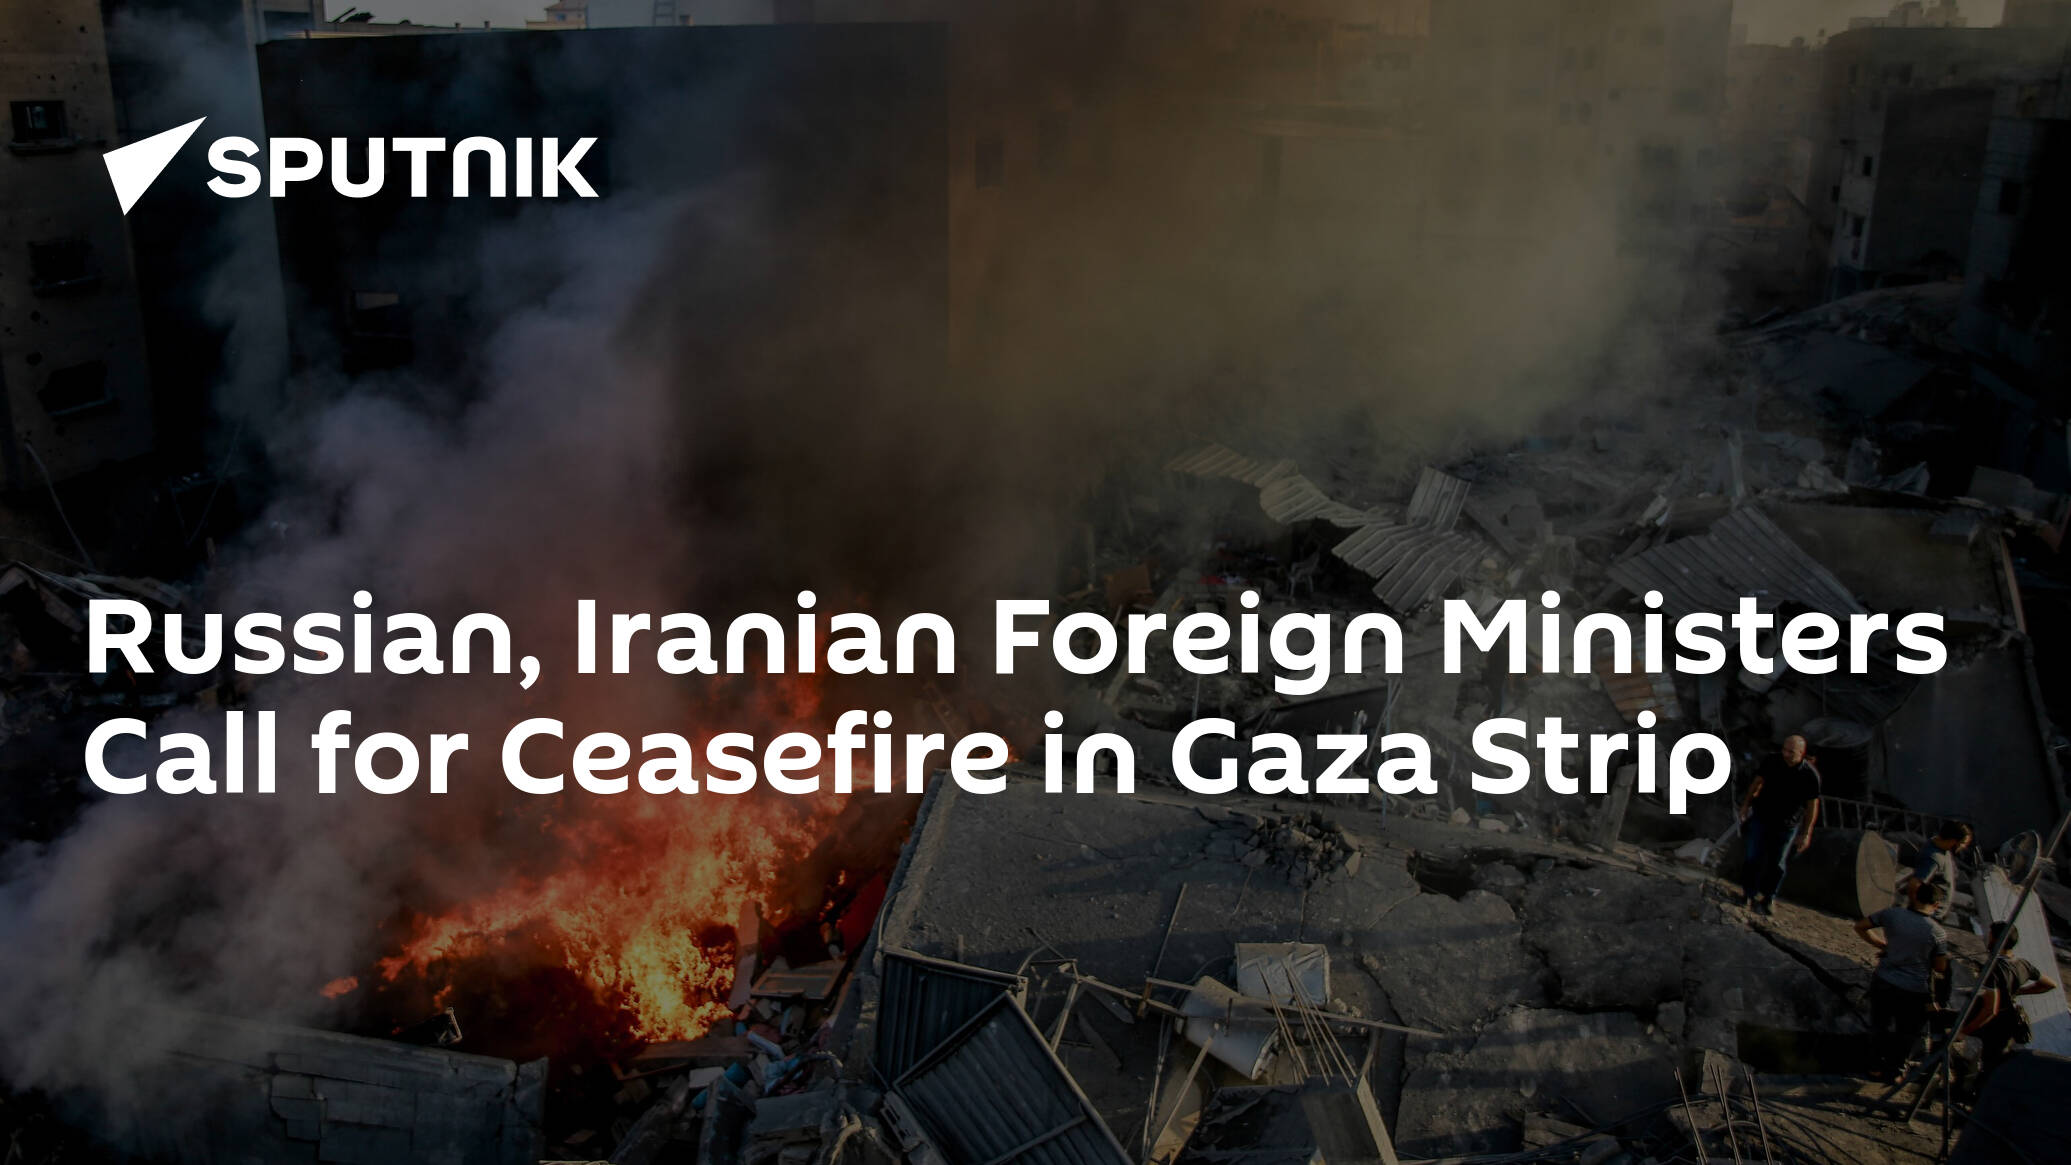 Russian, Iranian Foreign Ministers Call for Ceasefire in Gaza Strip